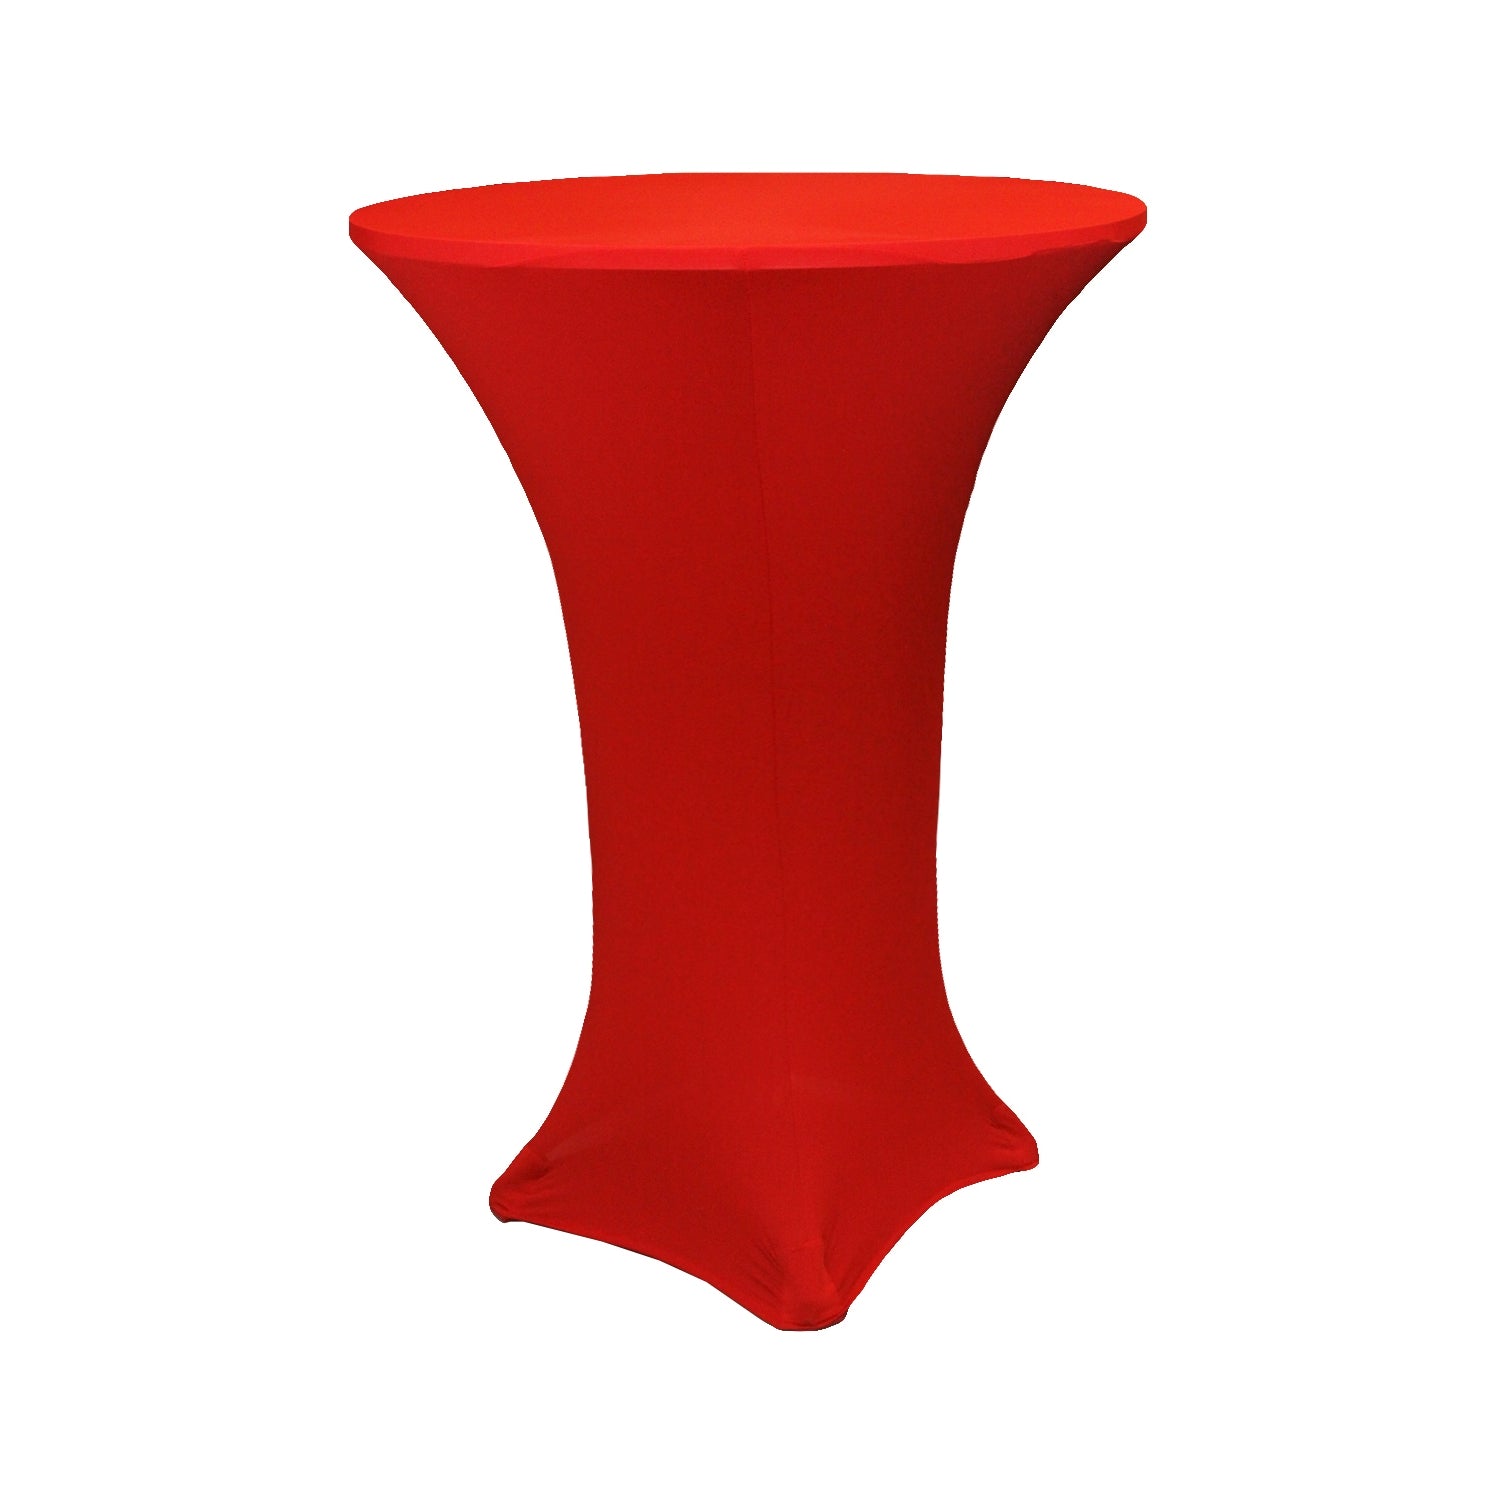 Spandex Cocktail Table Cover 36" Round - Red - CV Linens